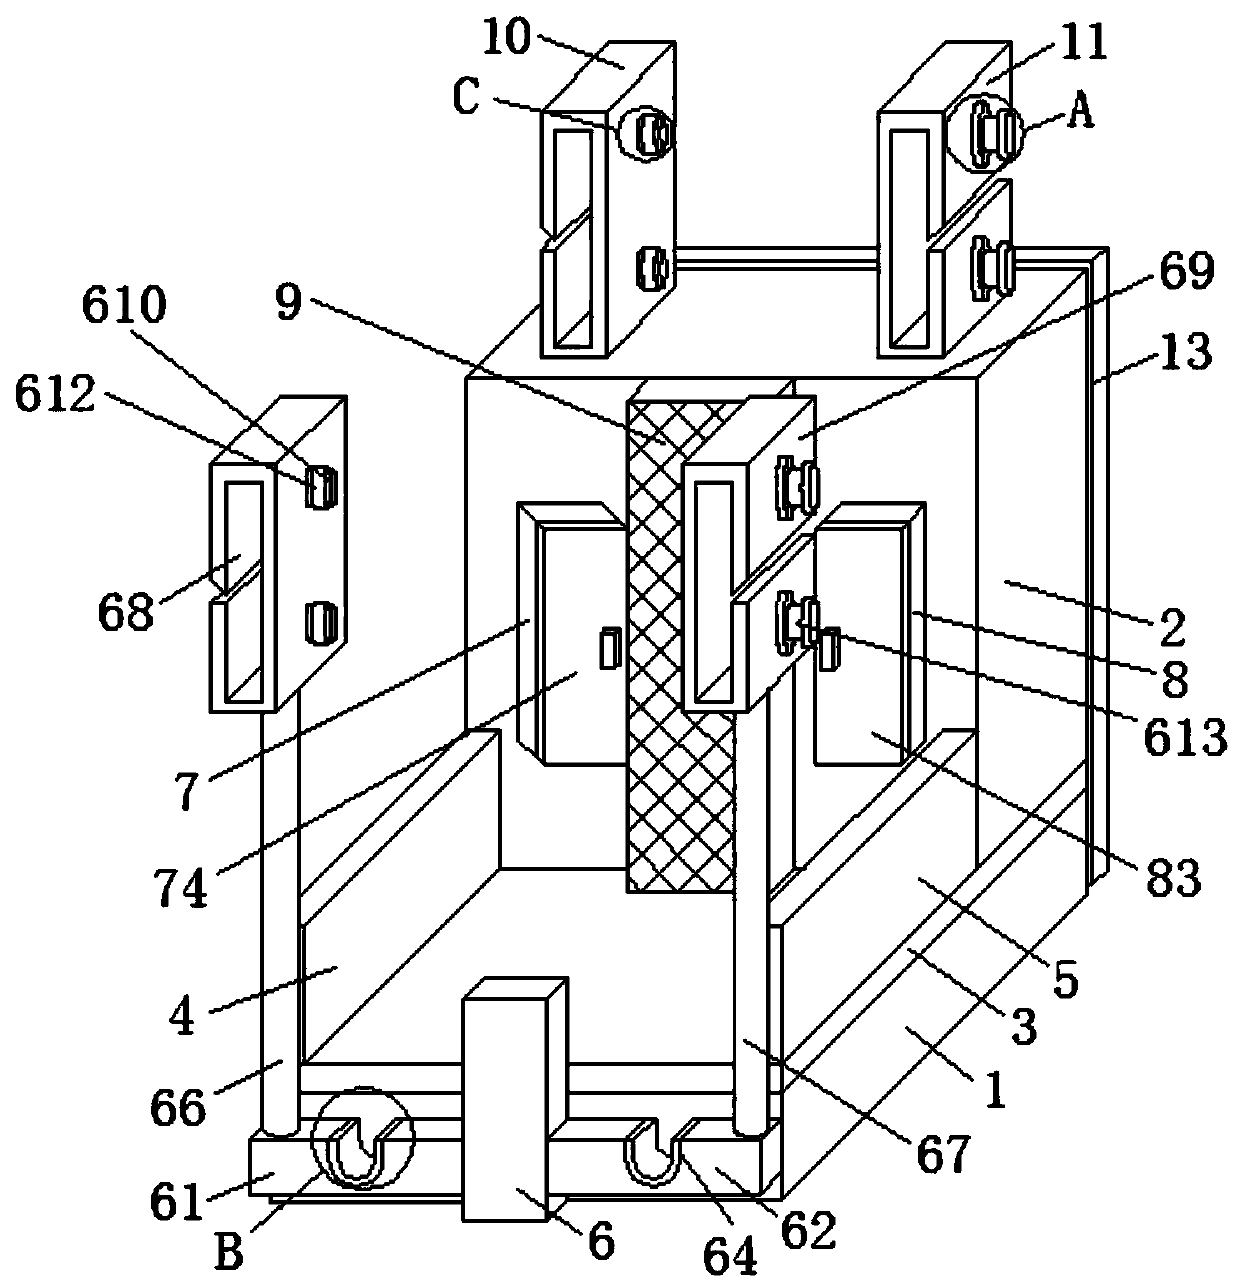 Electrician high-voltage line walking device